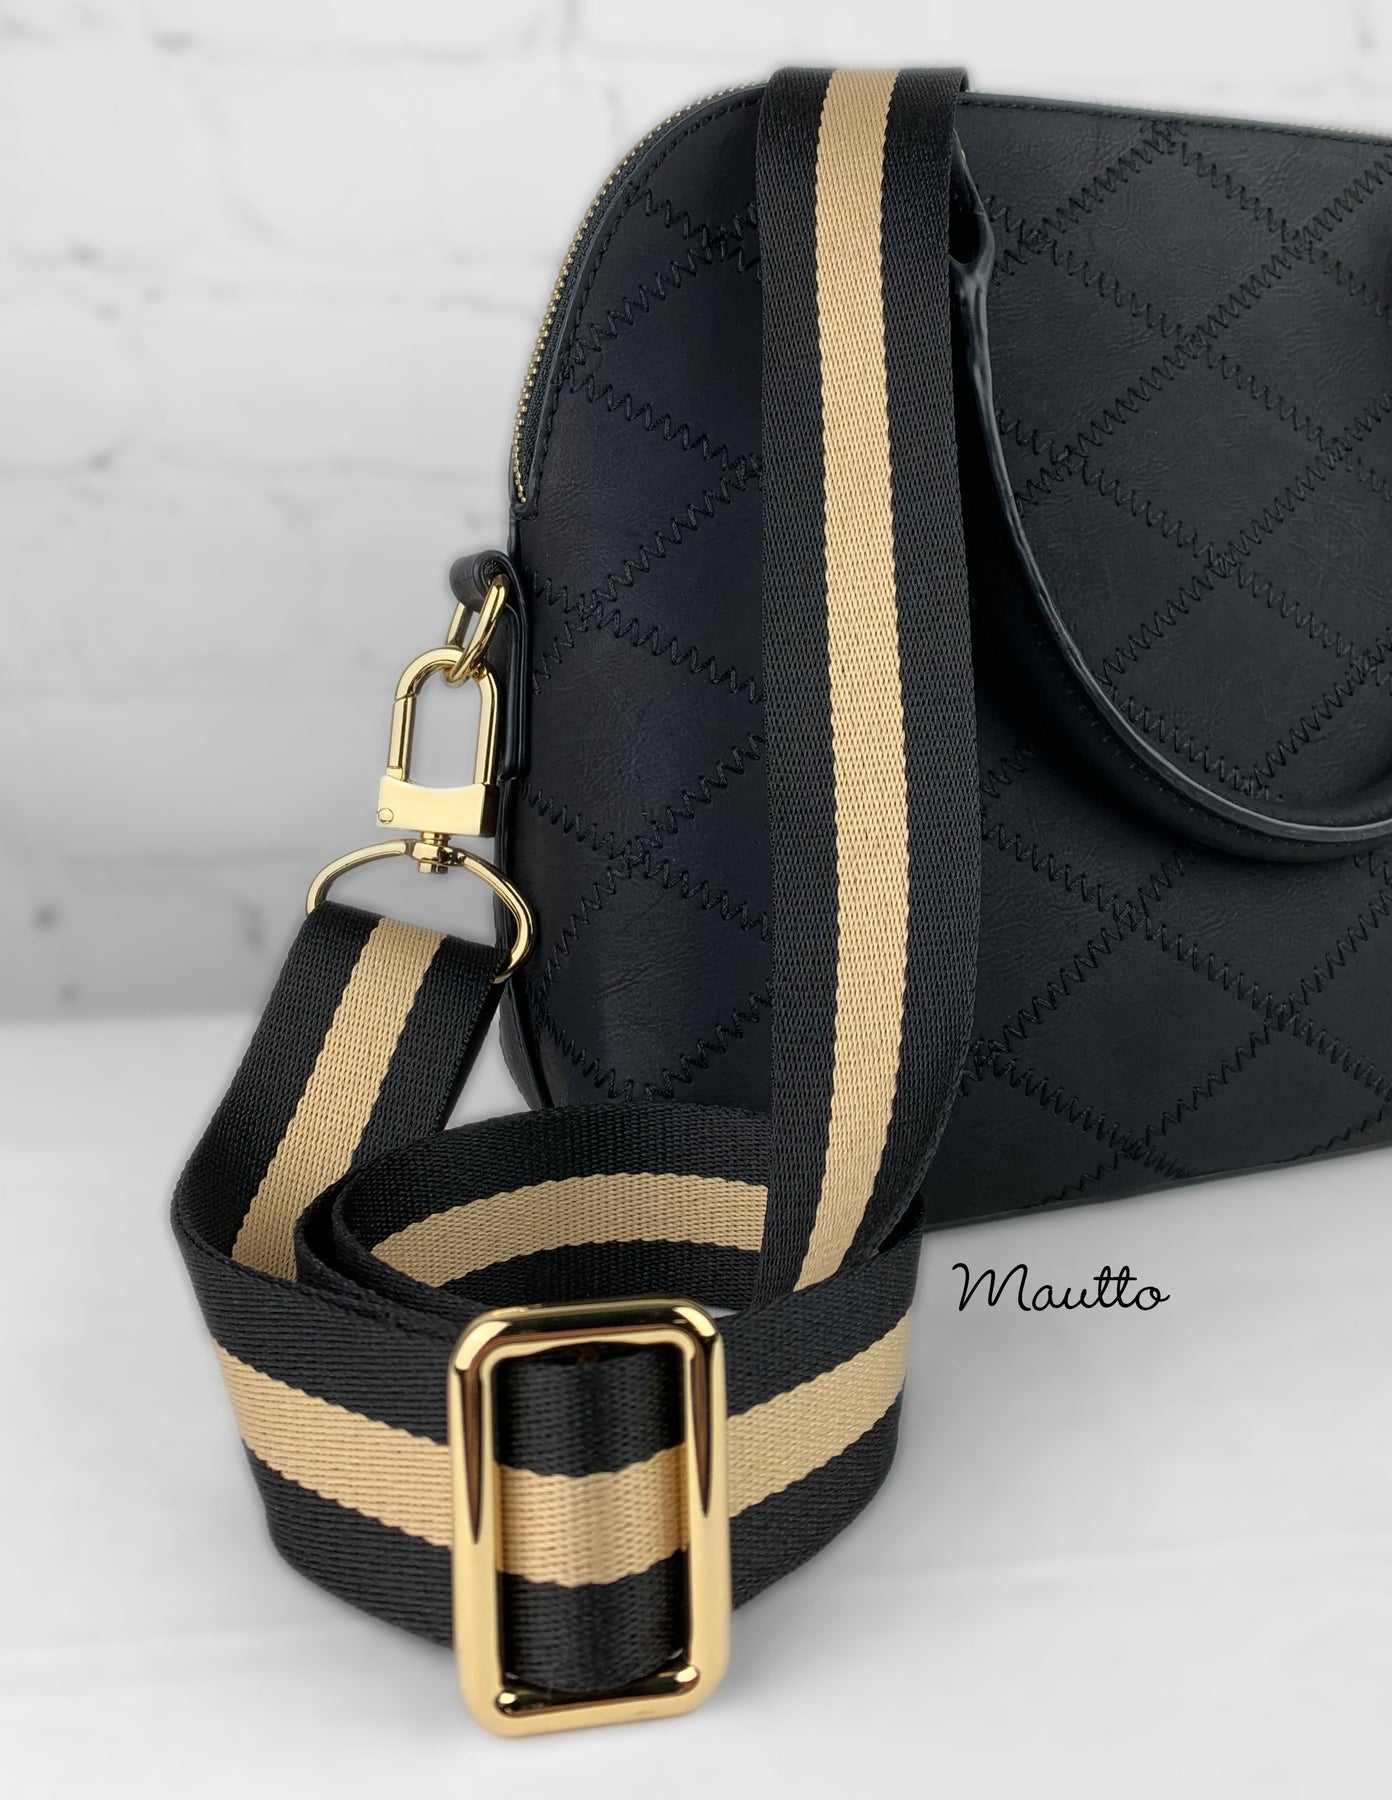 Mautto Adjustable Leather Strap, Shoulder to Crossbody Length - Modern Colors Black Pebble Leather / #16 Gold-Tone